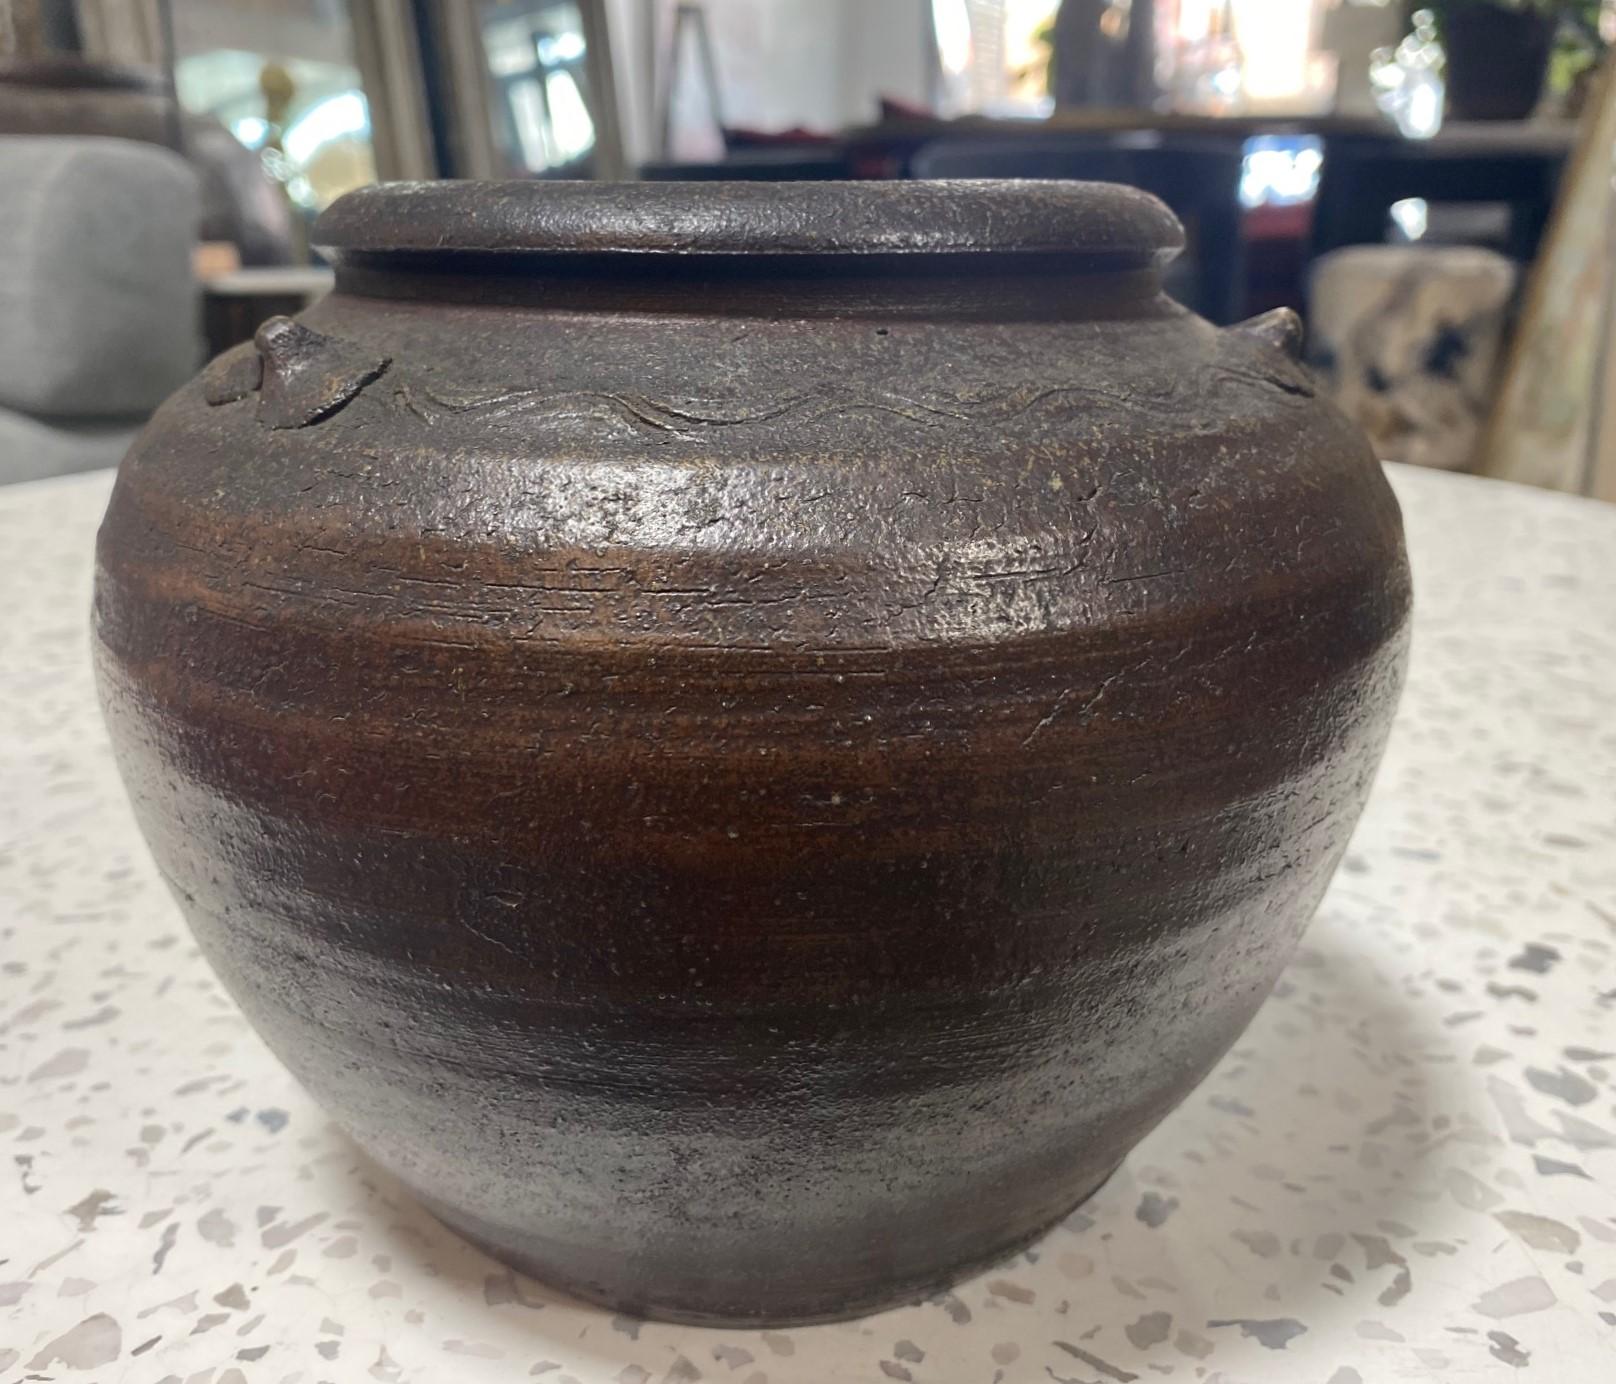 A beautiful, darkly fired, antique Bizen ware three-ear tsubo jar/pot/vase by renowned Japanese master potter/artist Kaneshige Toyo (1896-1967) featuring a line of hand-incised shoulder waves and light natural organic forming ash glaze. Kaneshige is